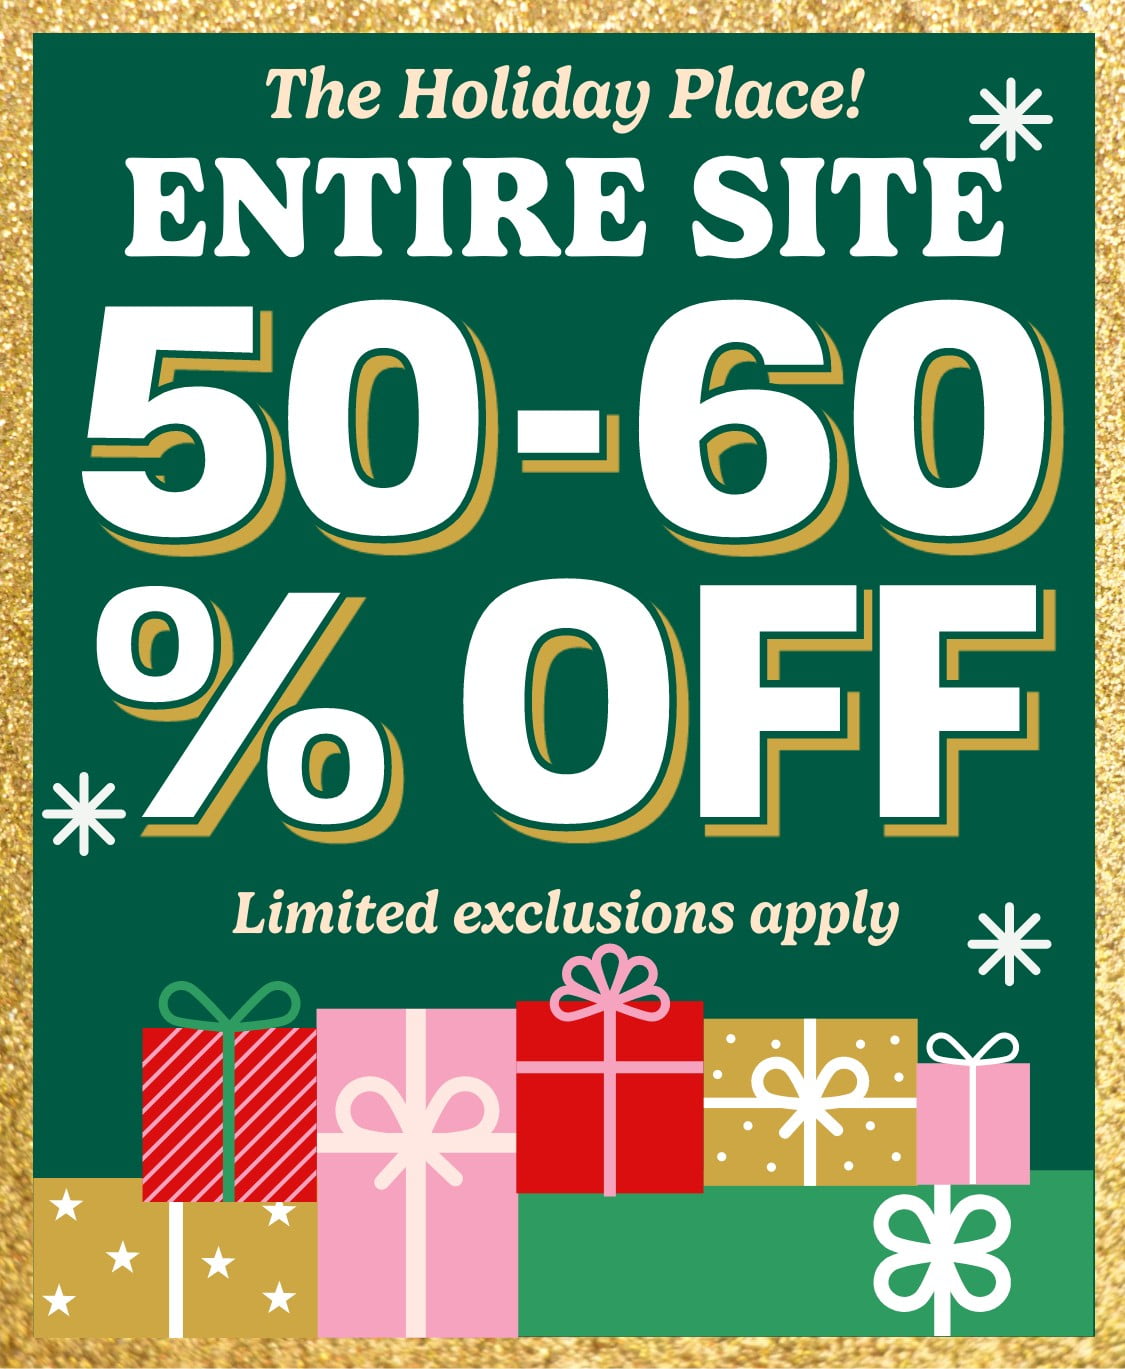 The Holiday Place! Entire Site 50-60% off Limited exclusions apply